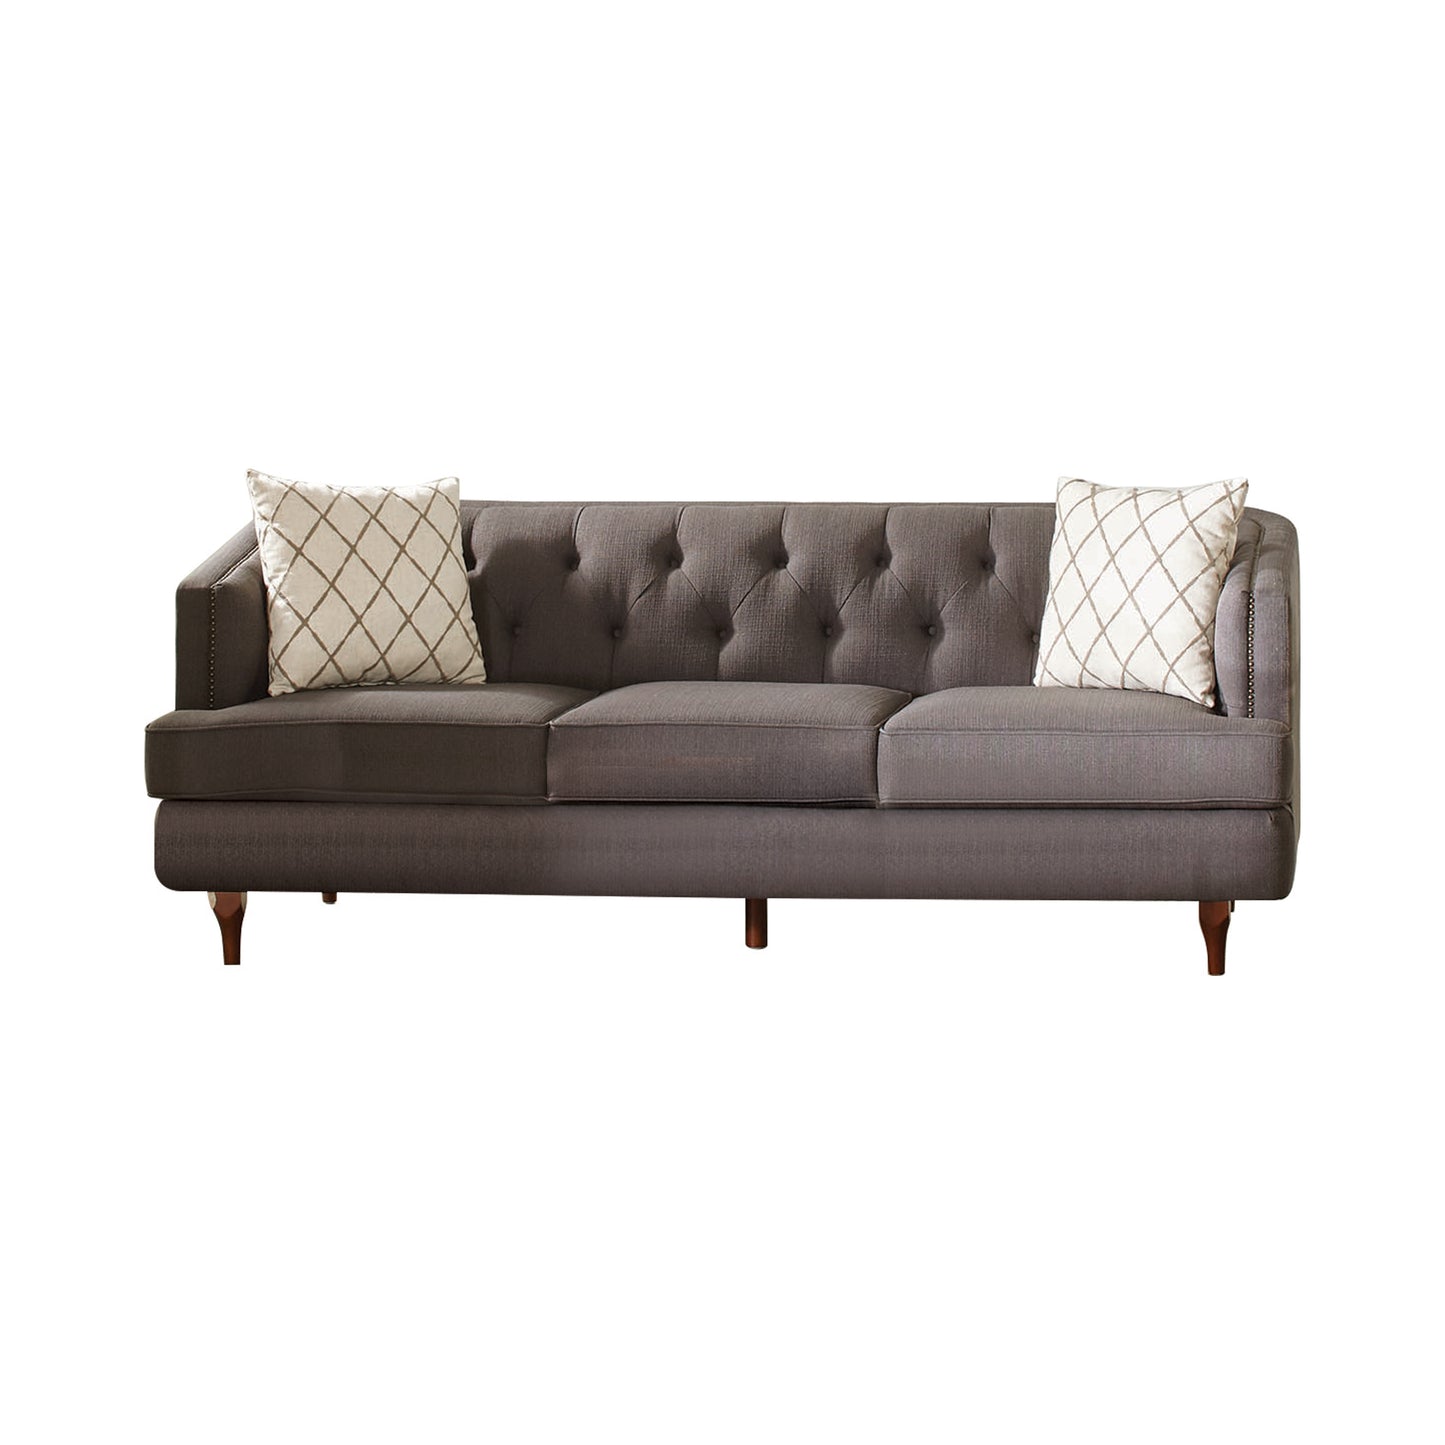 Shelby 2-piece Tufted Upholstered Living Room Set Grey and Brown